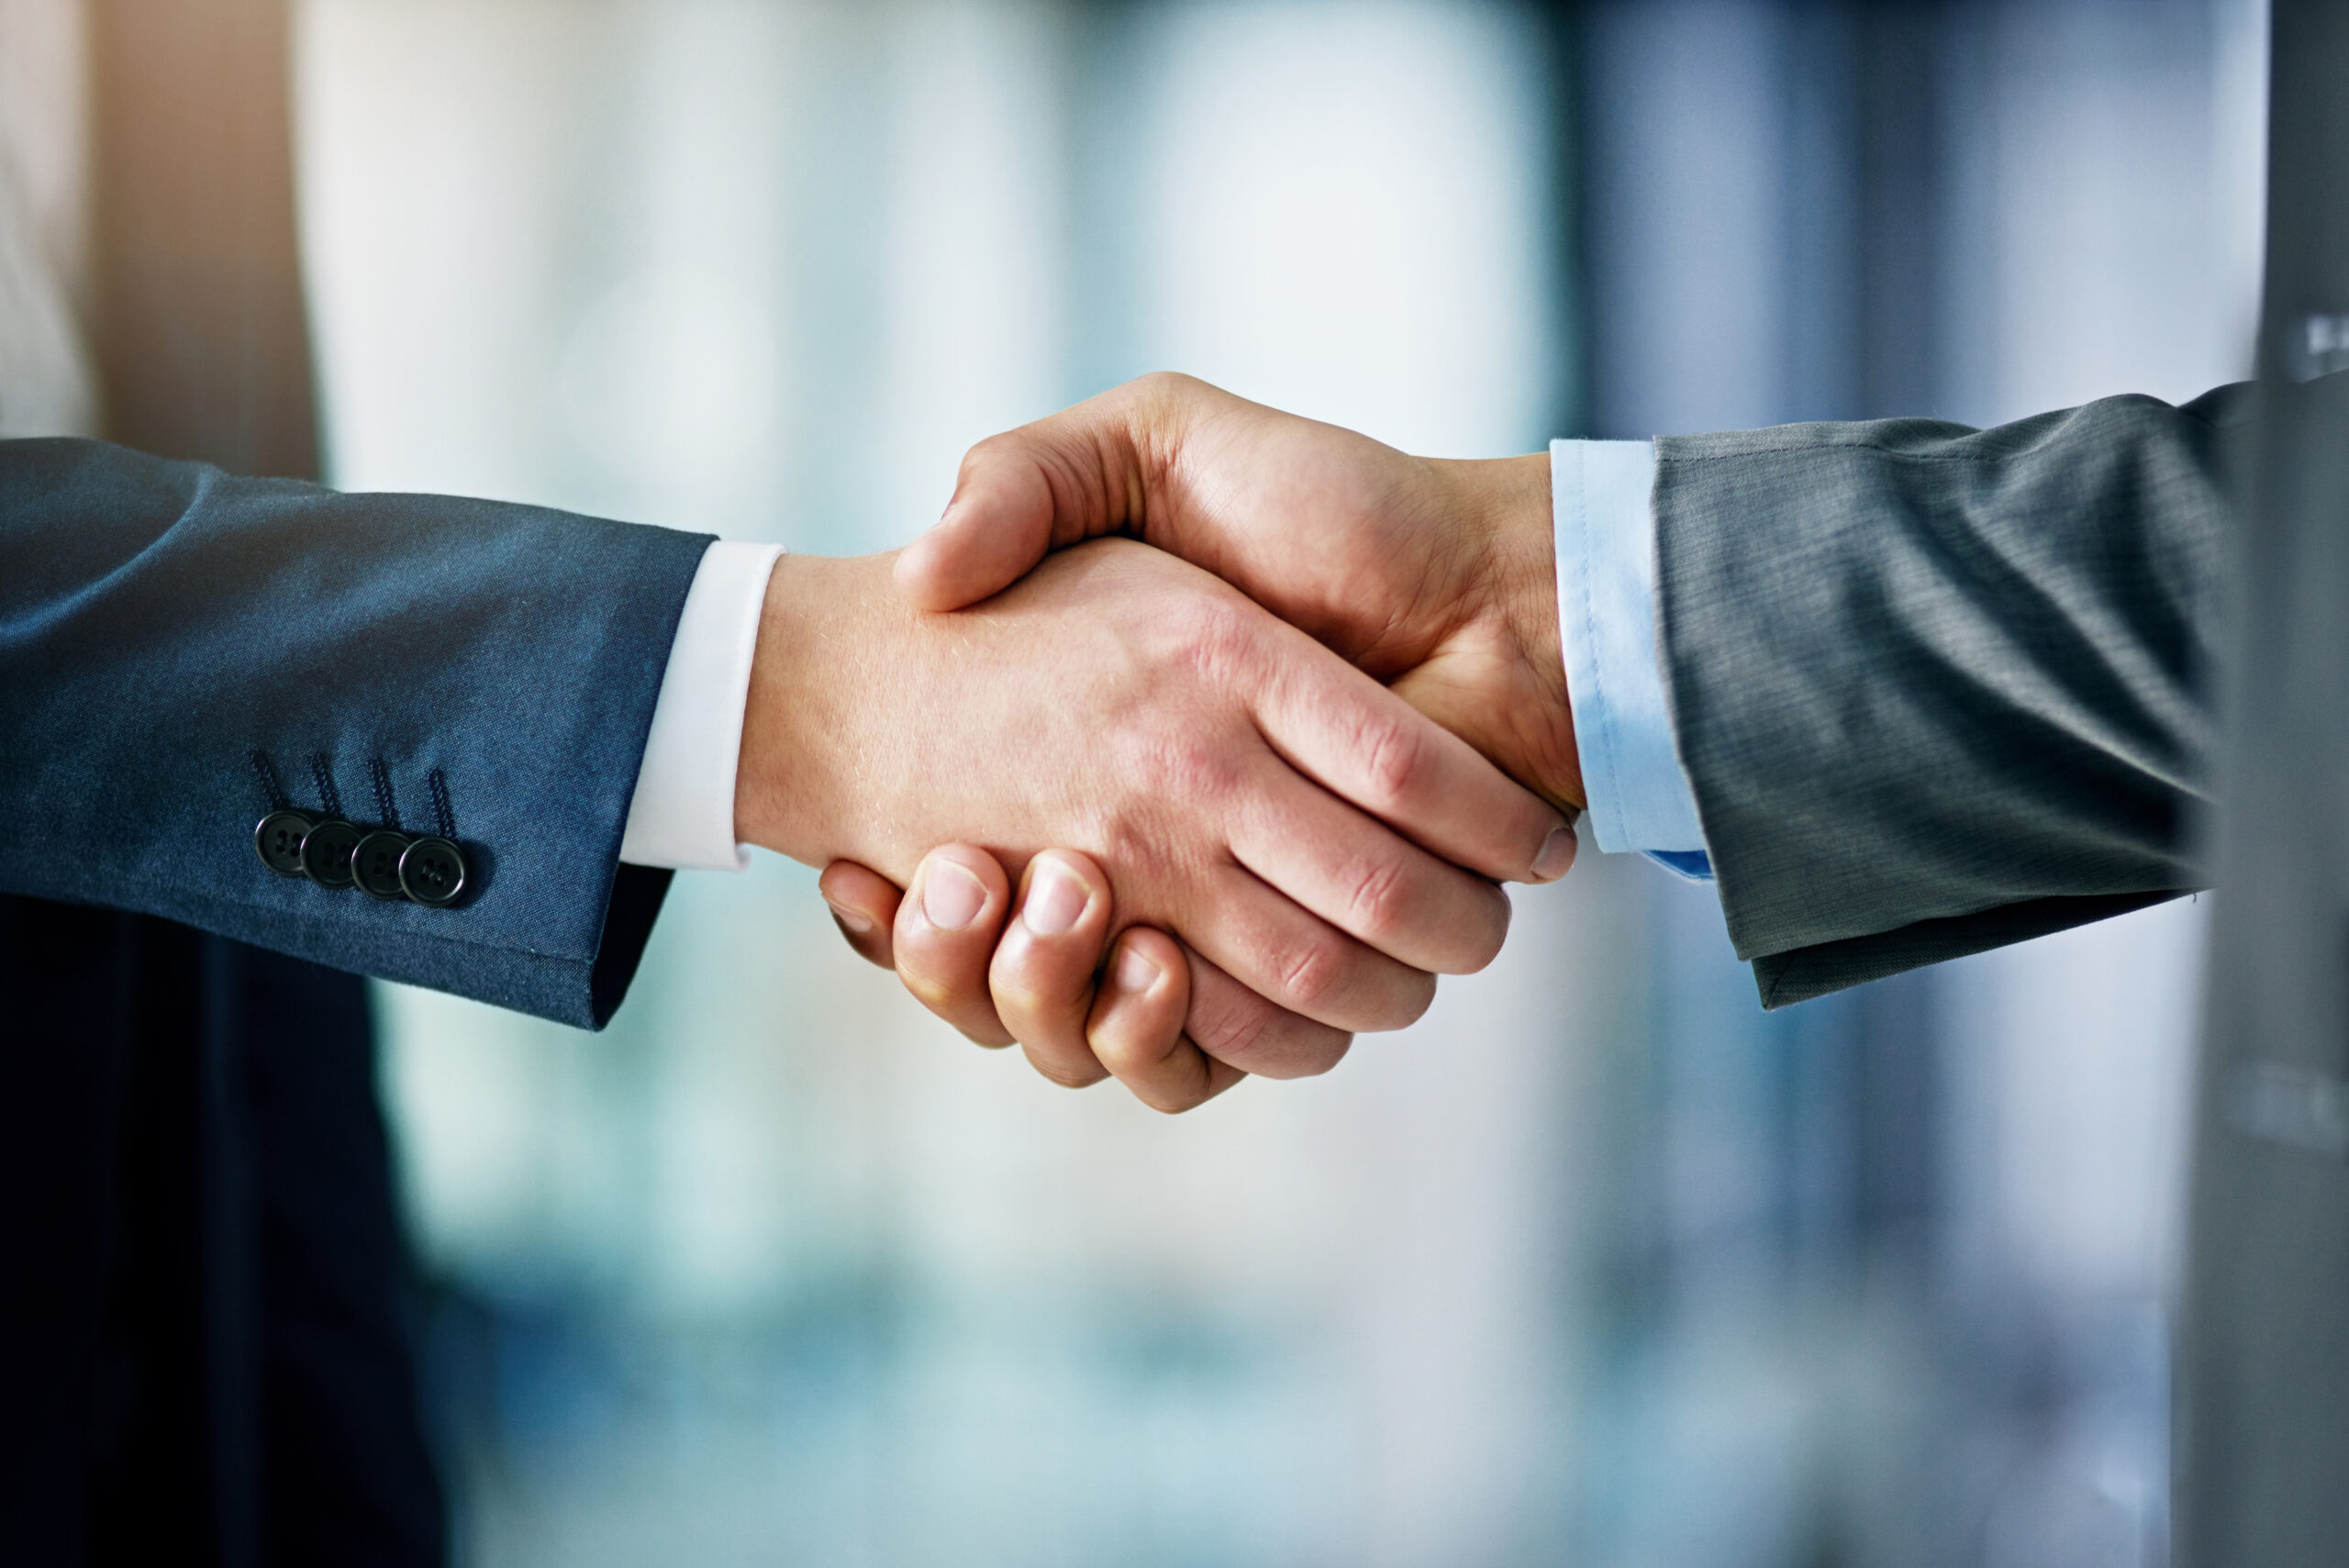 The hands of two business leaders are clasped in a handshake against an out-of-focus background.